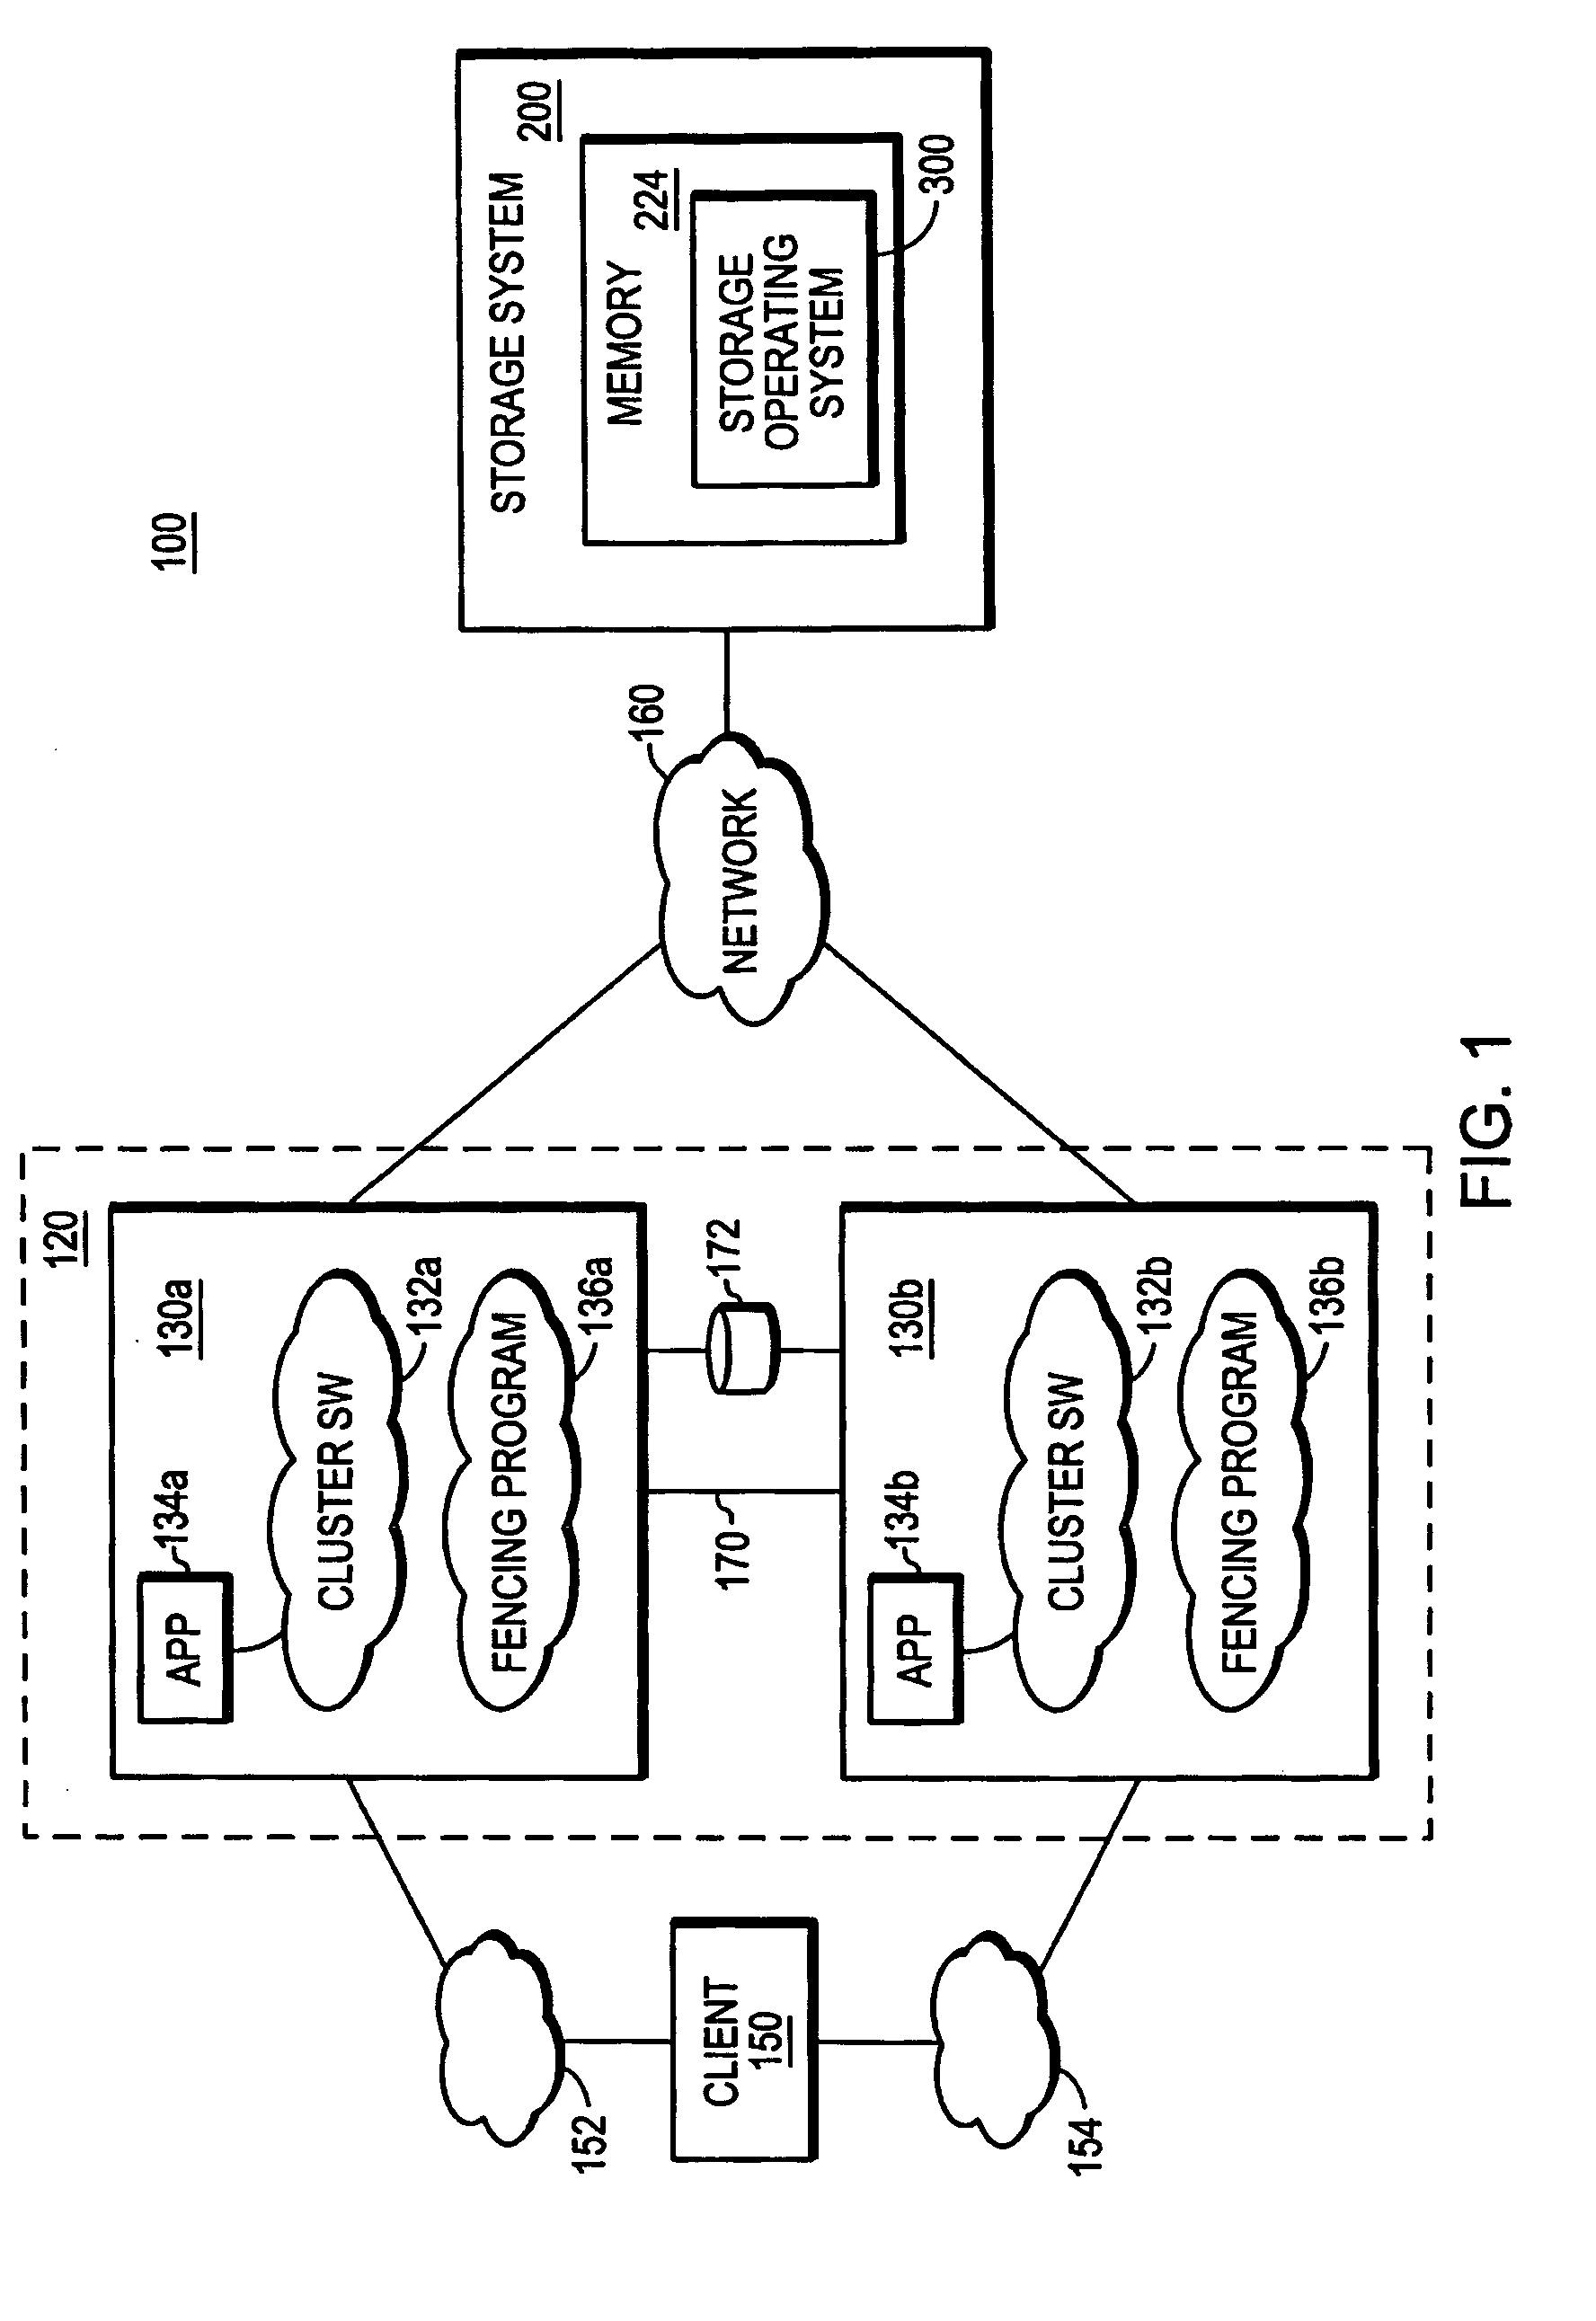 Client failure fencing mechanism for fencing network file system data in a host-cluster environment